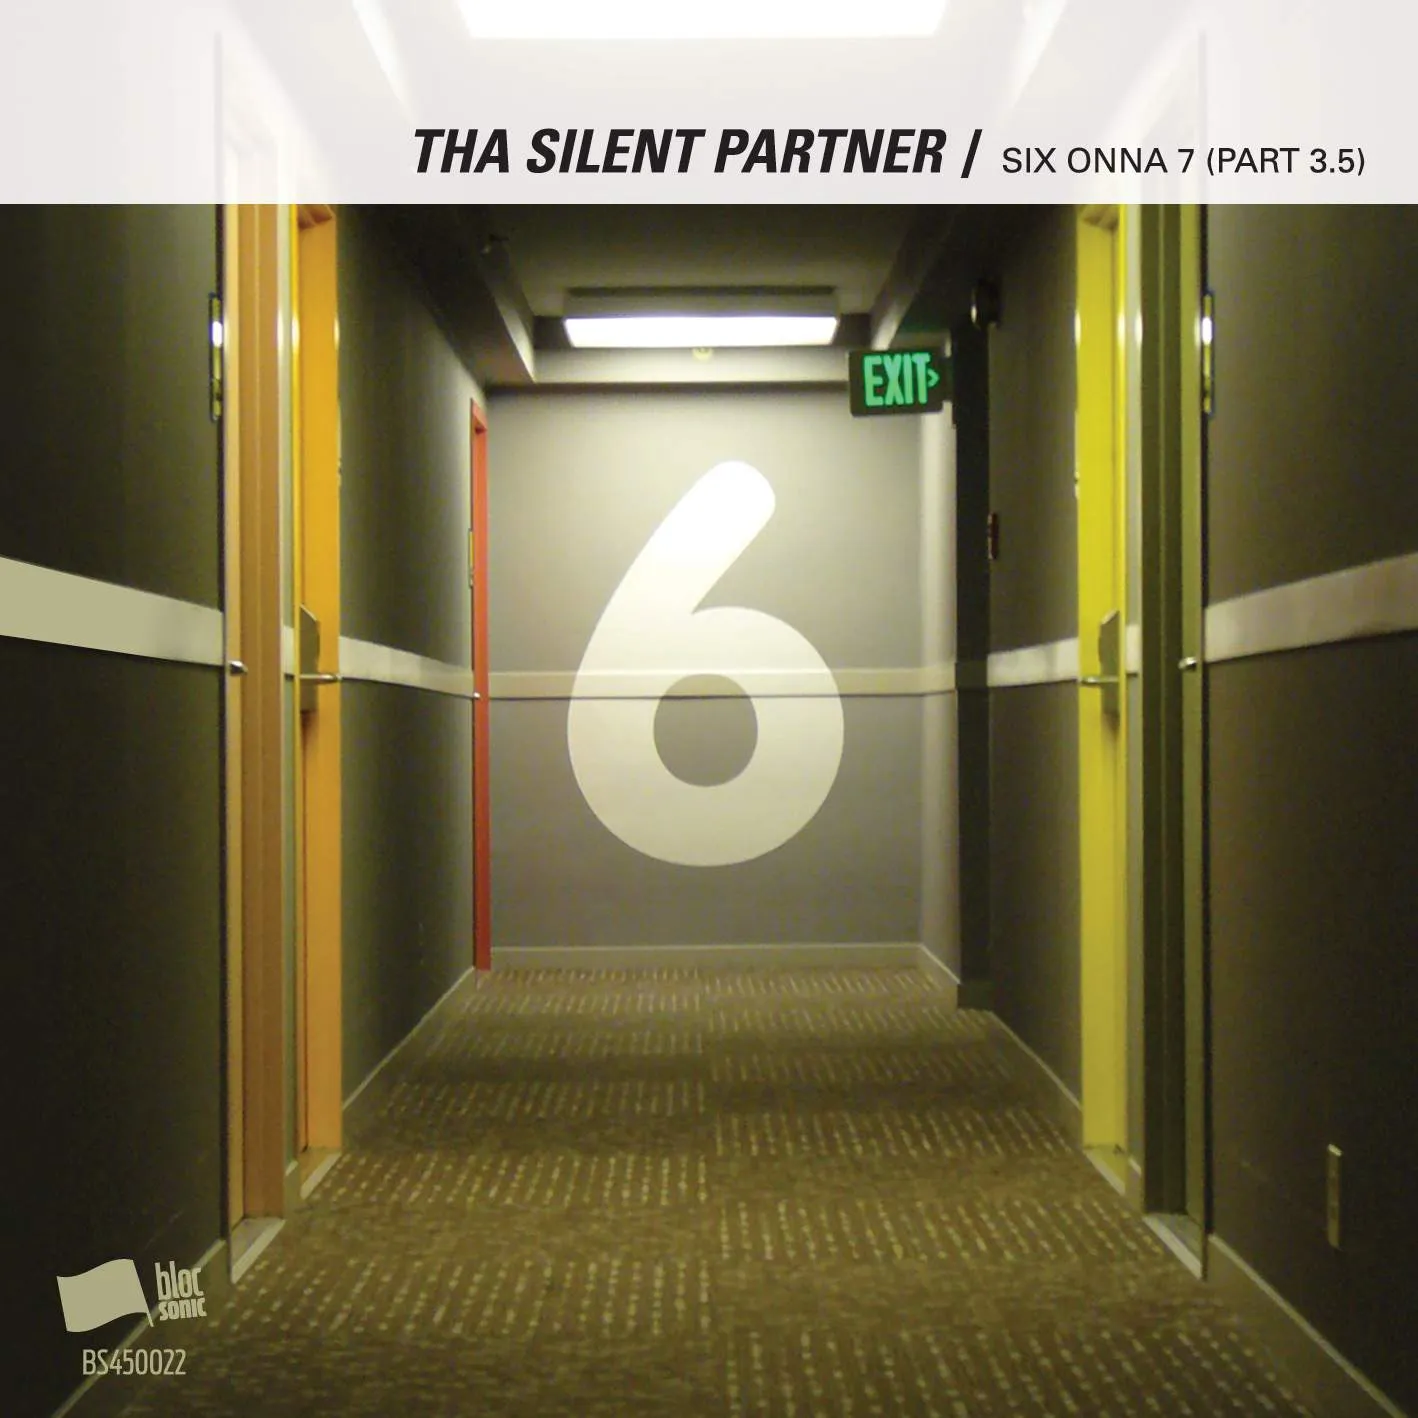 Album cover for “SIX ONNA 7 (Part 3.5)” by Tha Silent Partner